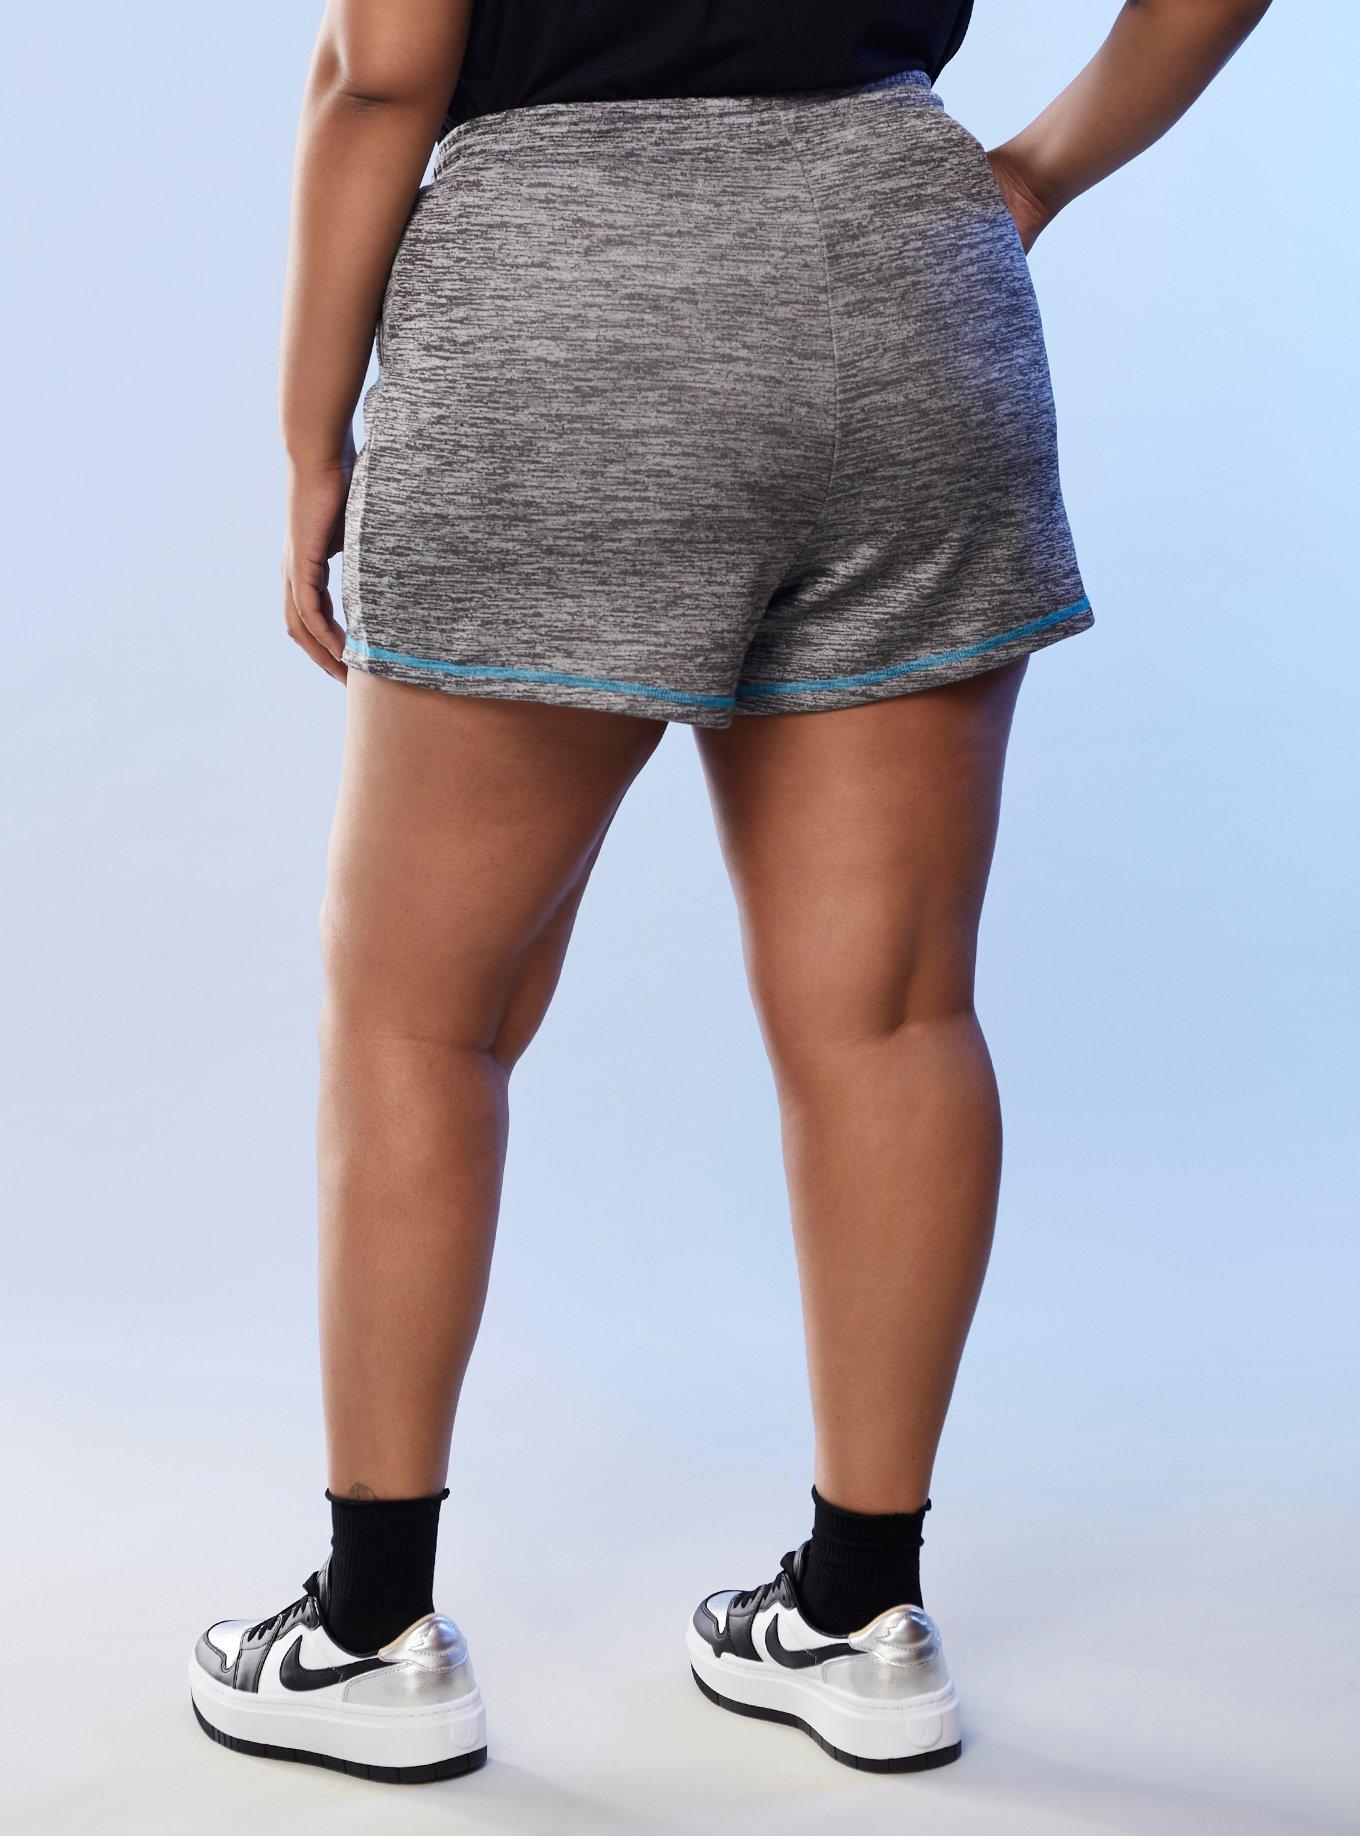 Her Universe Star Wars Jedi Order Athletic Shorts Plus Size Her Universe Exclusive, CHARCOAL HEATHER, alternate